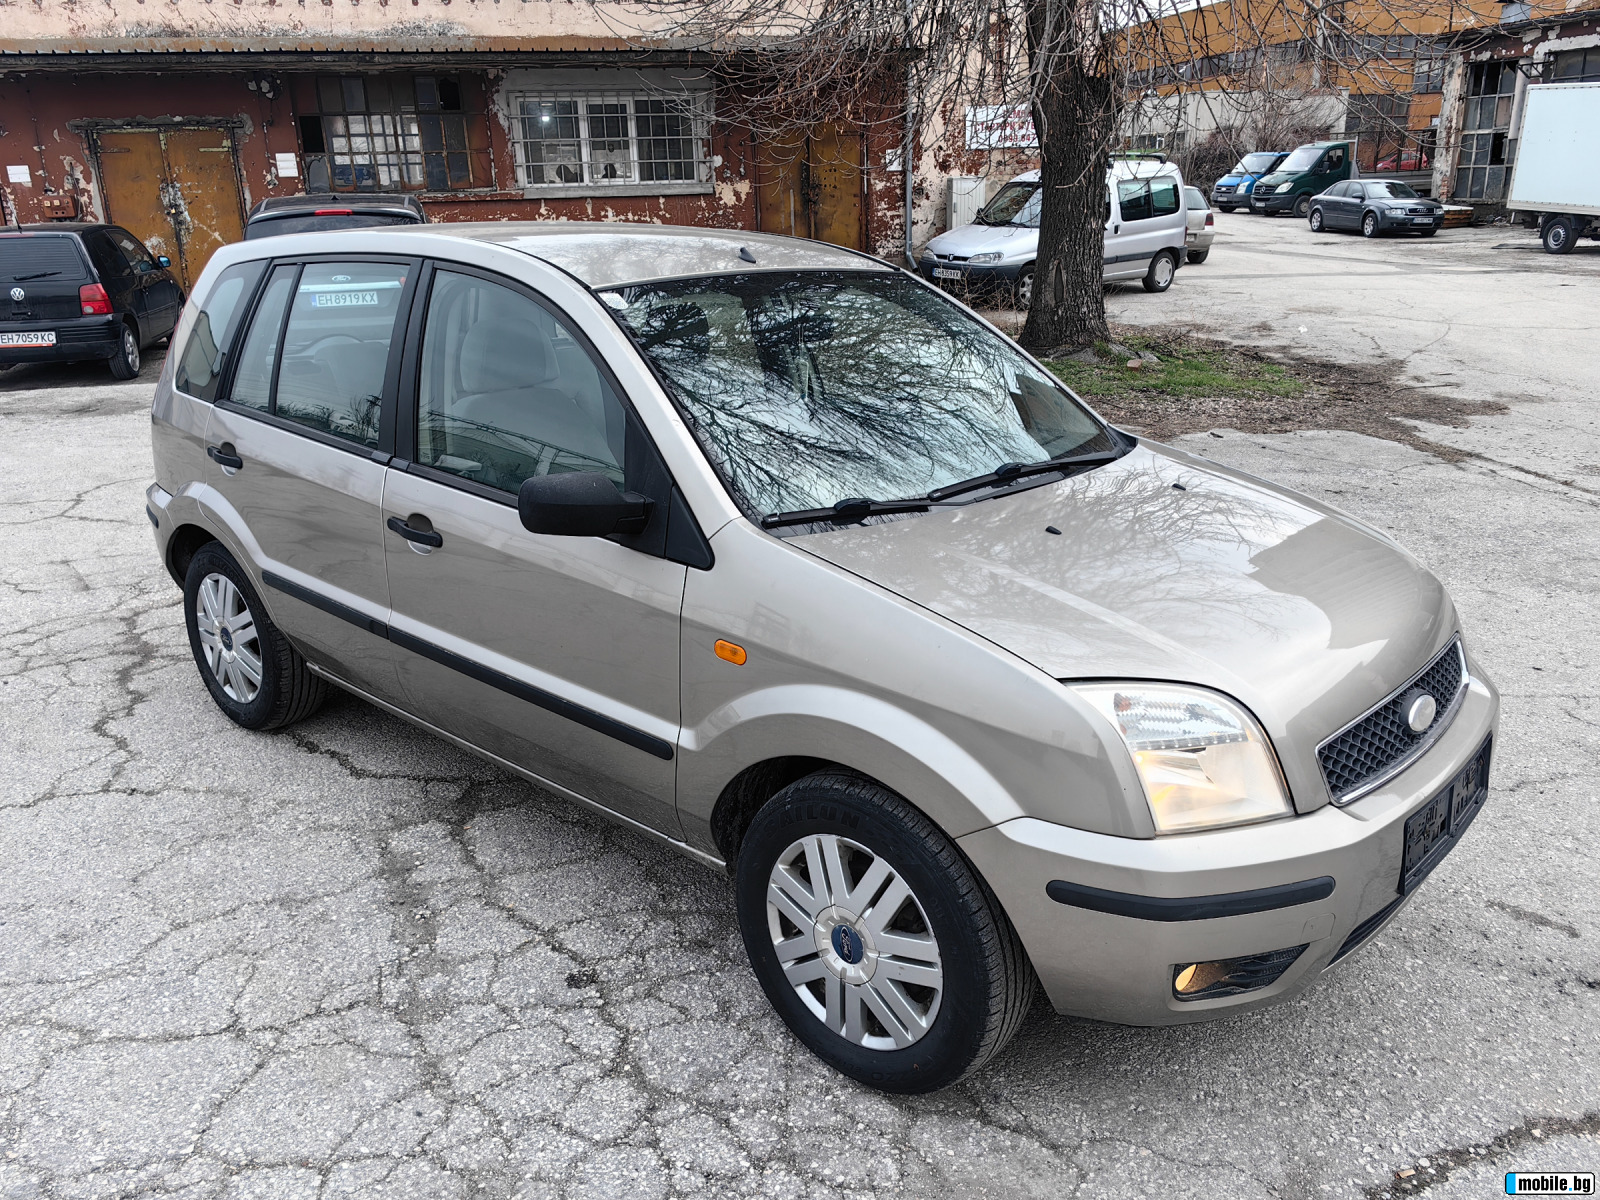 Ford Fusion 1.4 hdi 68ps | Mobile.bg   2